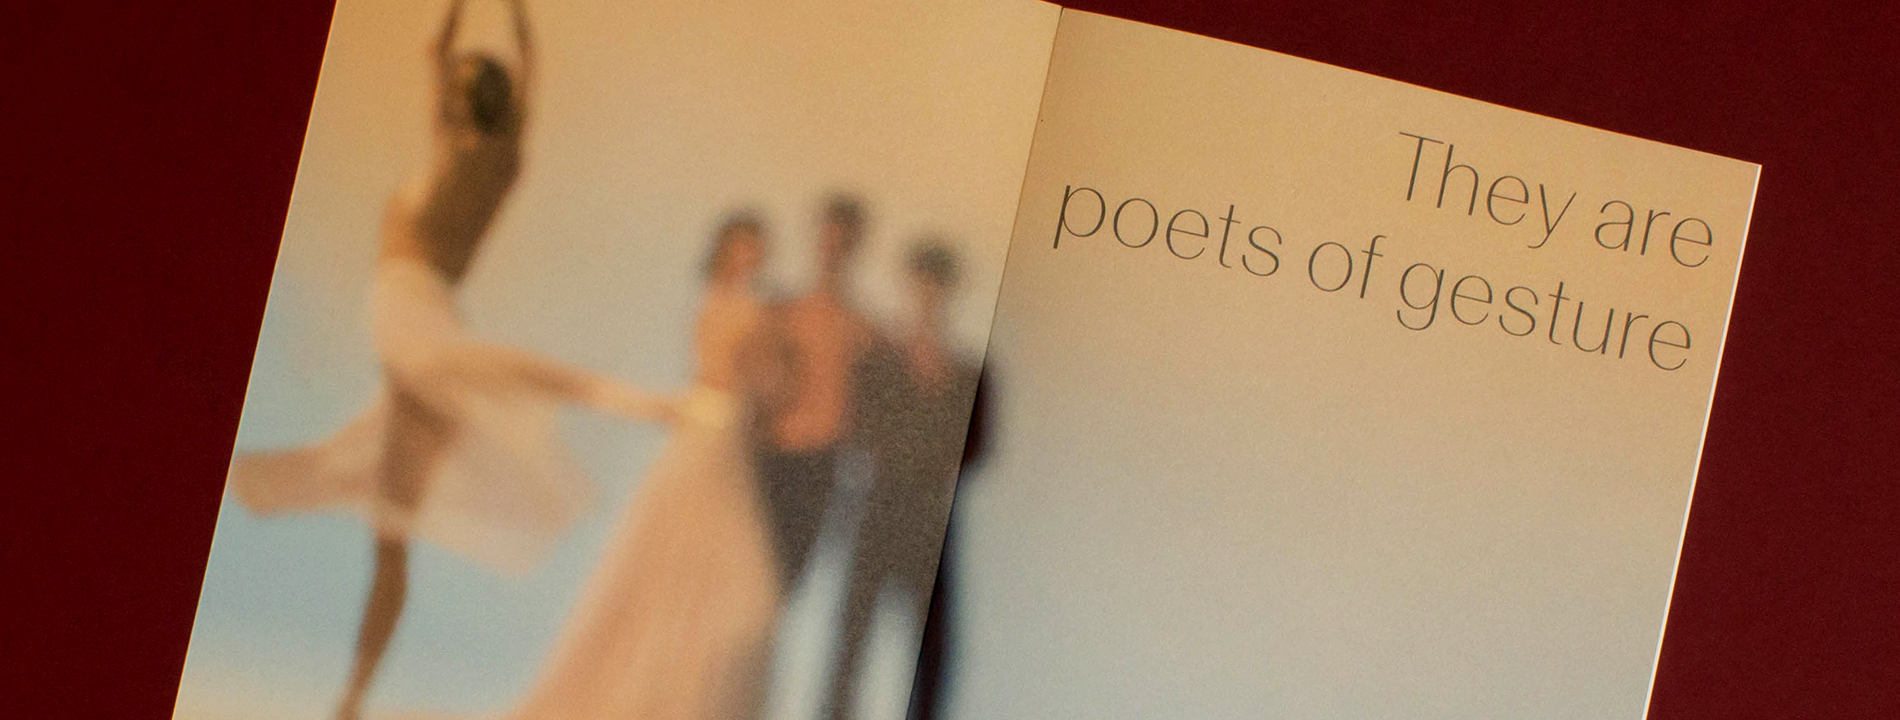 Close-up of inner spread of New York City Ballet booklet